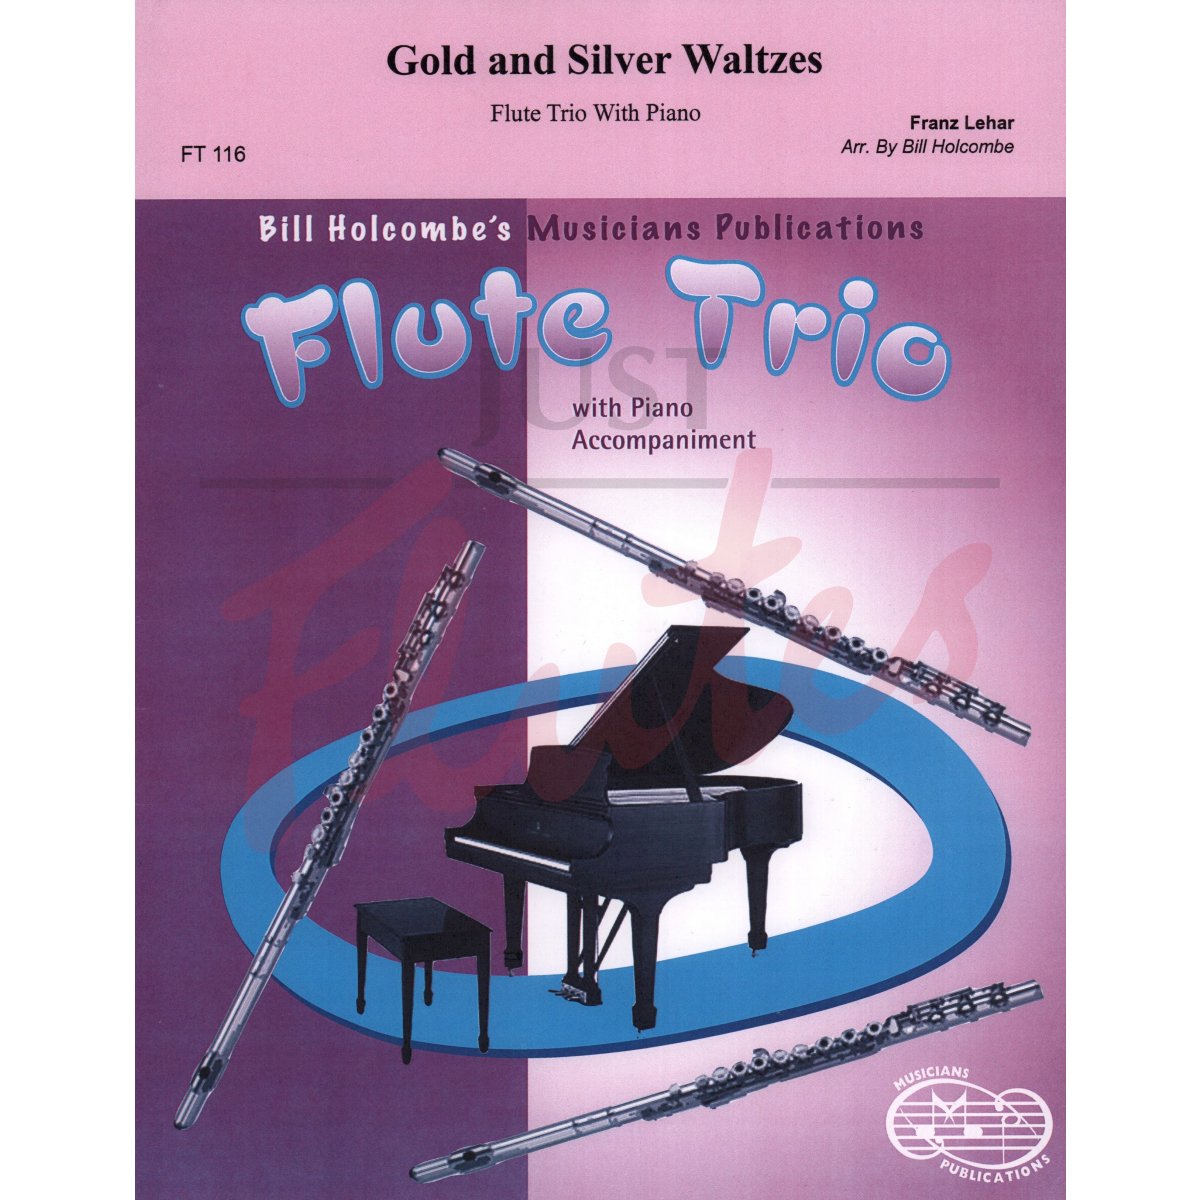 Gold and Silver Waltzes for Three Flutes and Piano